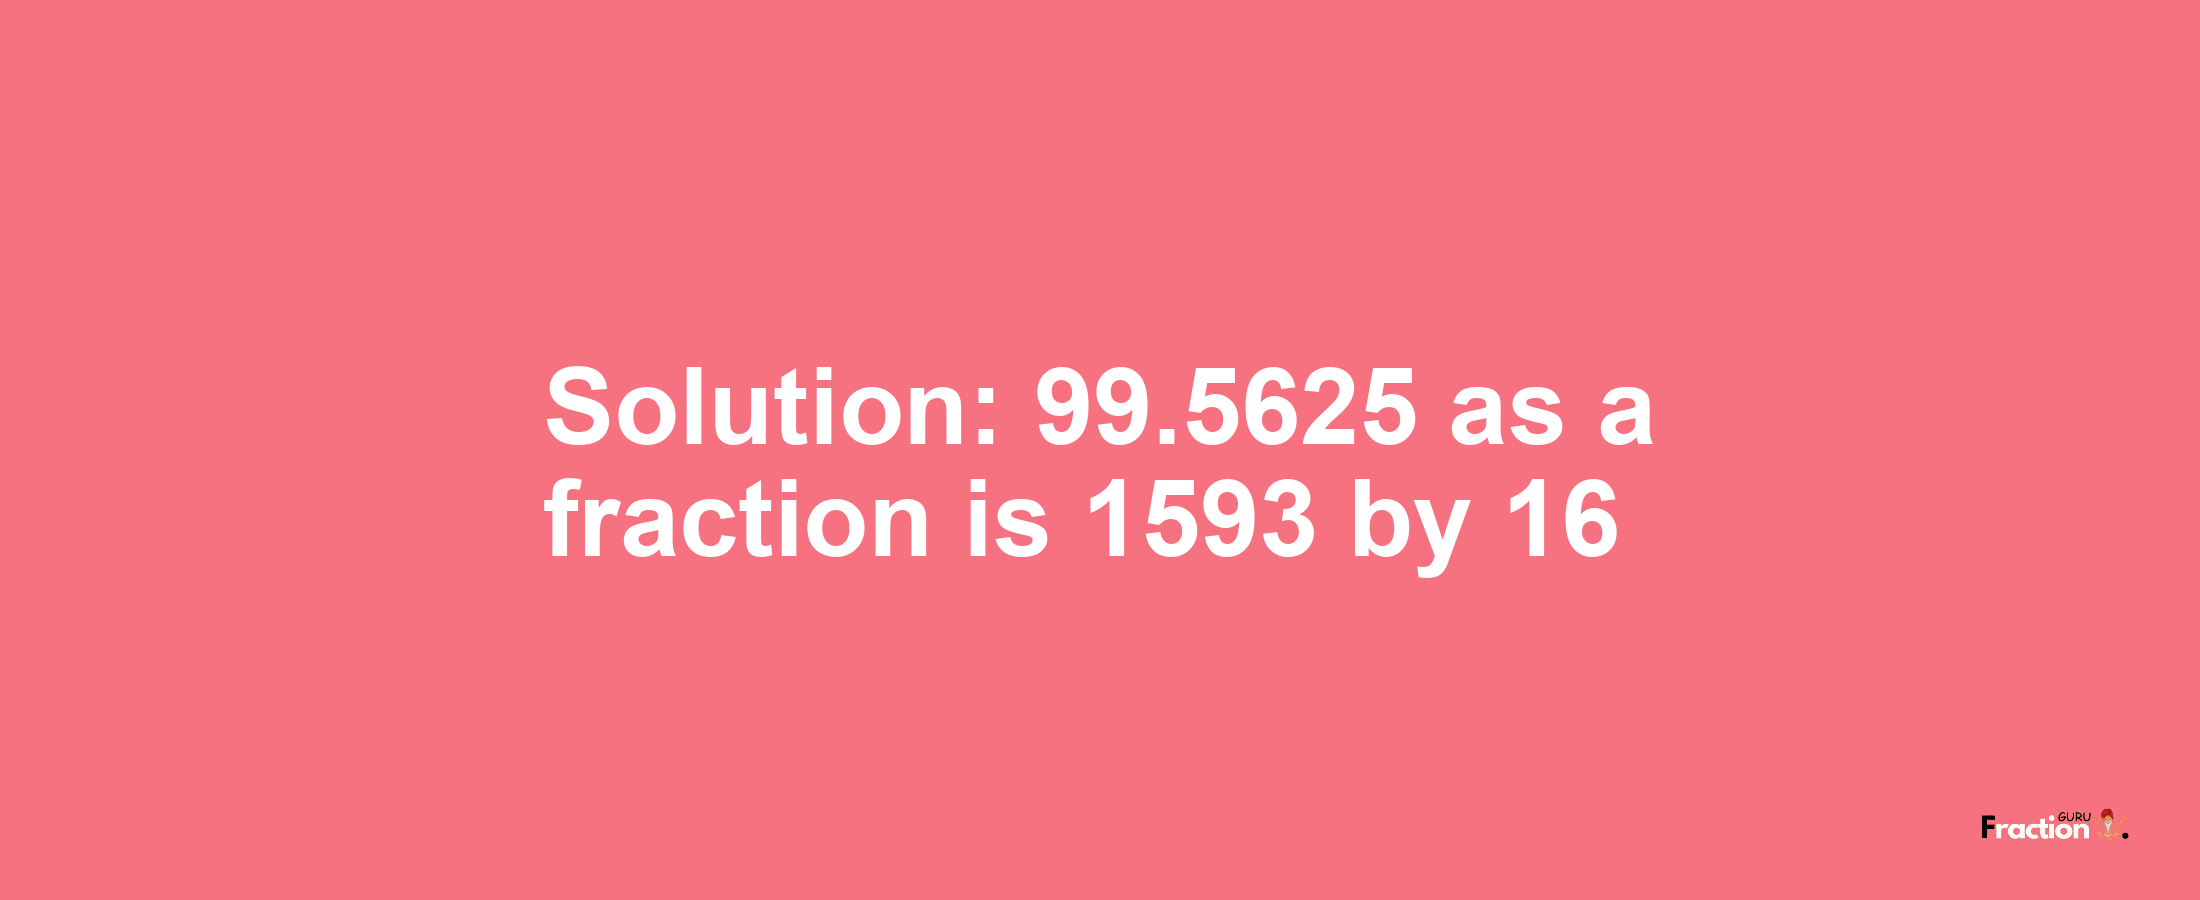 Solution:99.5625 as a fraction is 1593/16